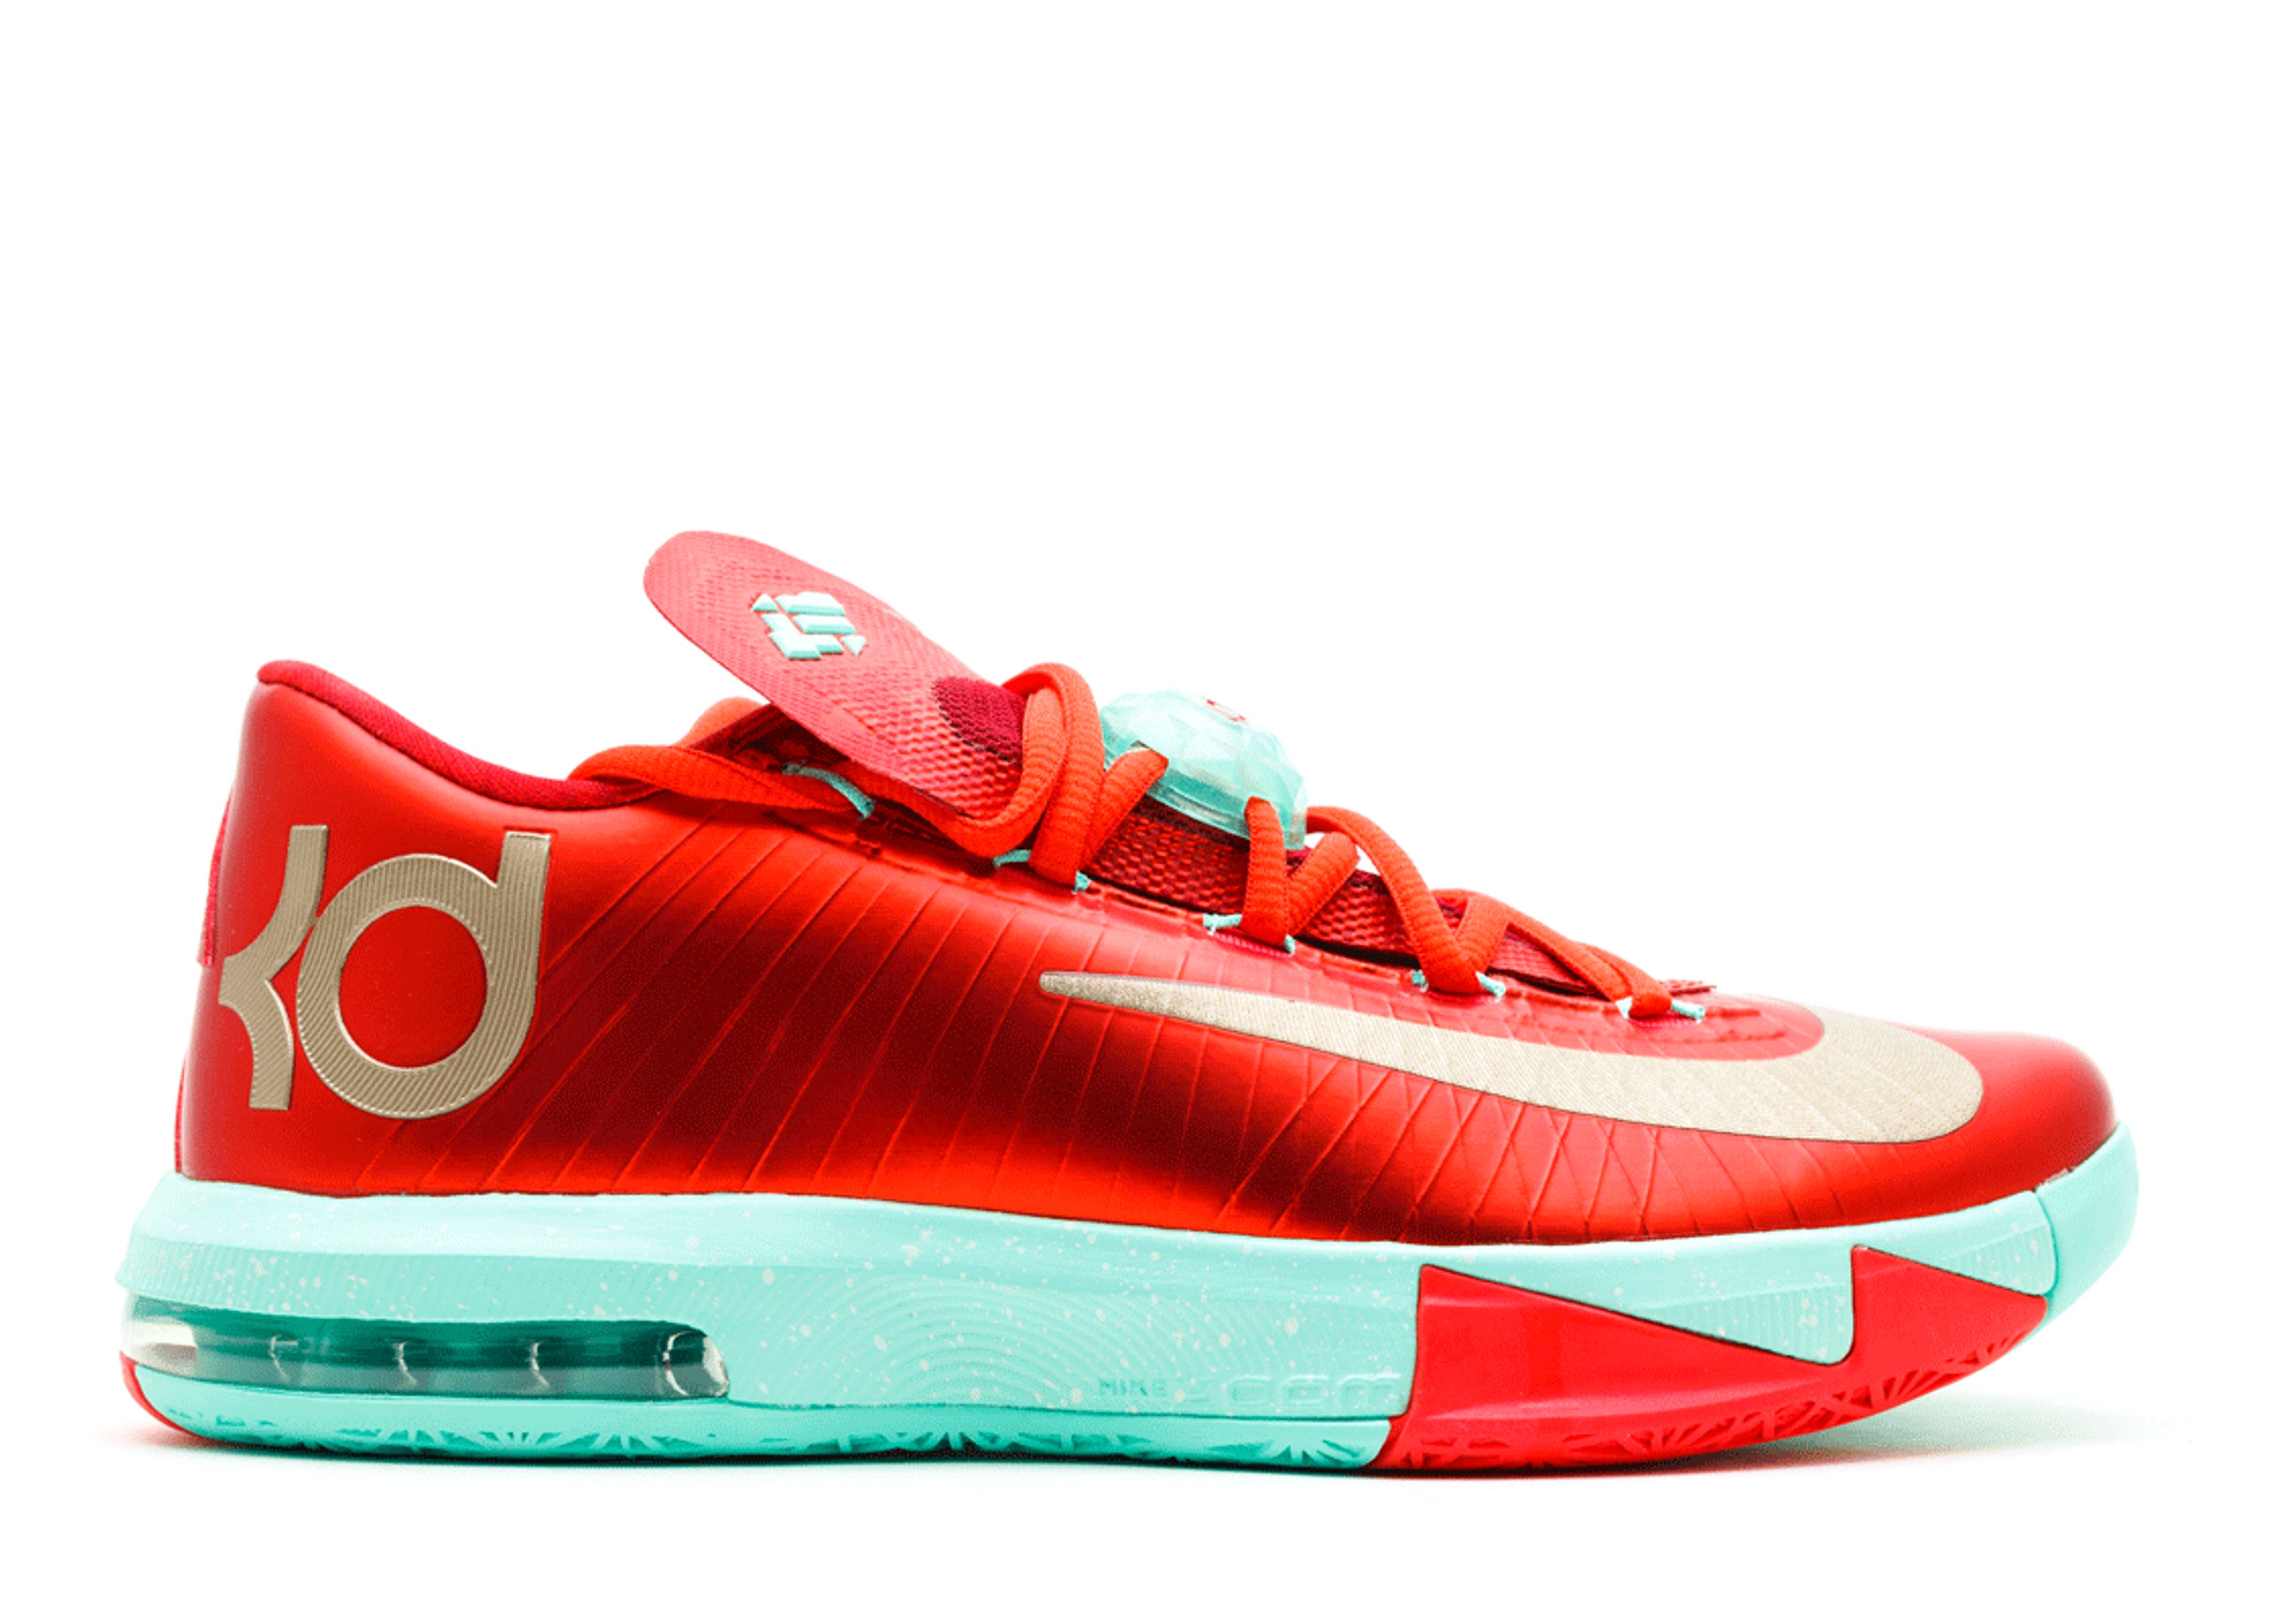 old kd shoes